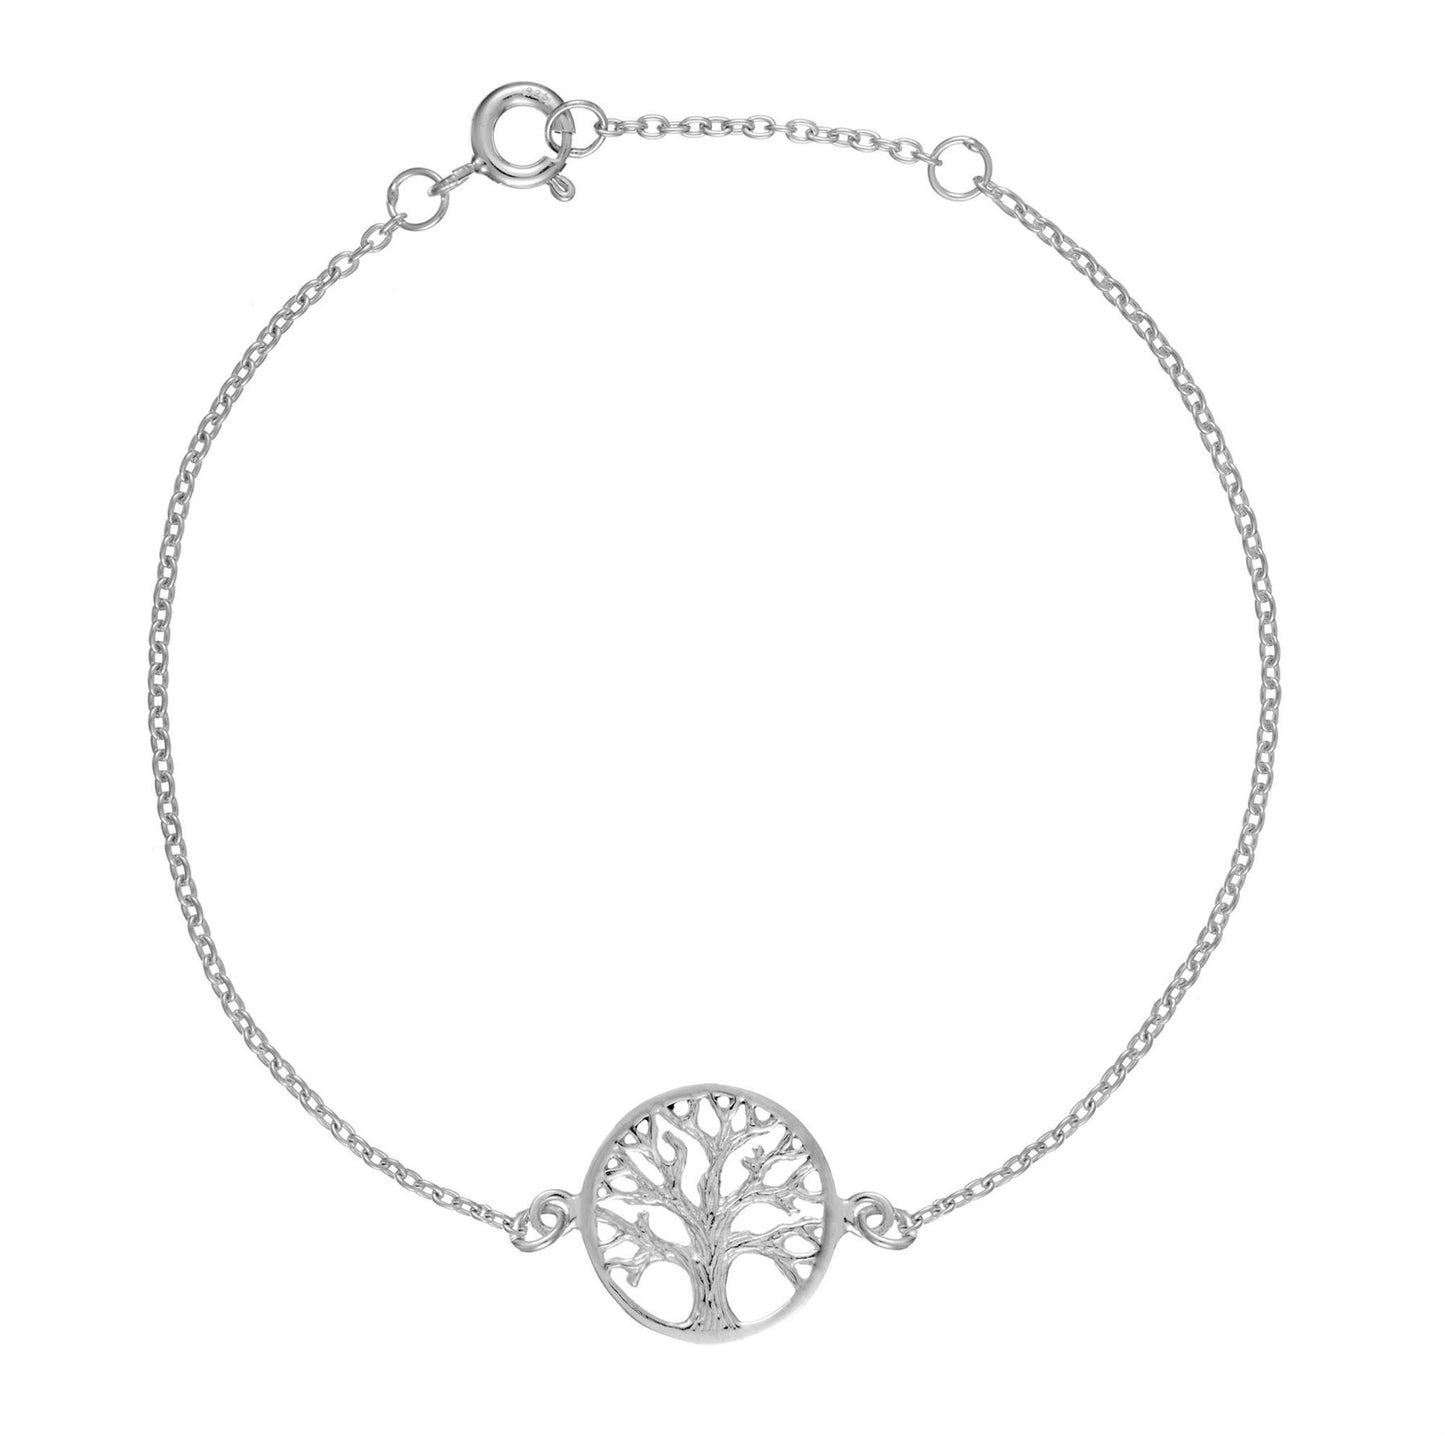 Shanore Sterling Tree of Life Bracelet by georgetti.com